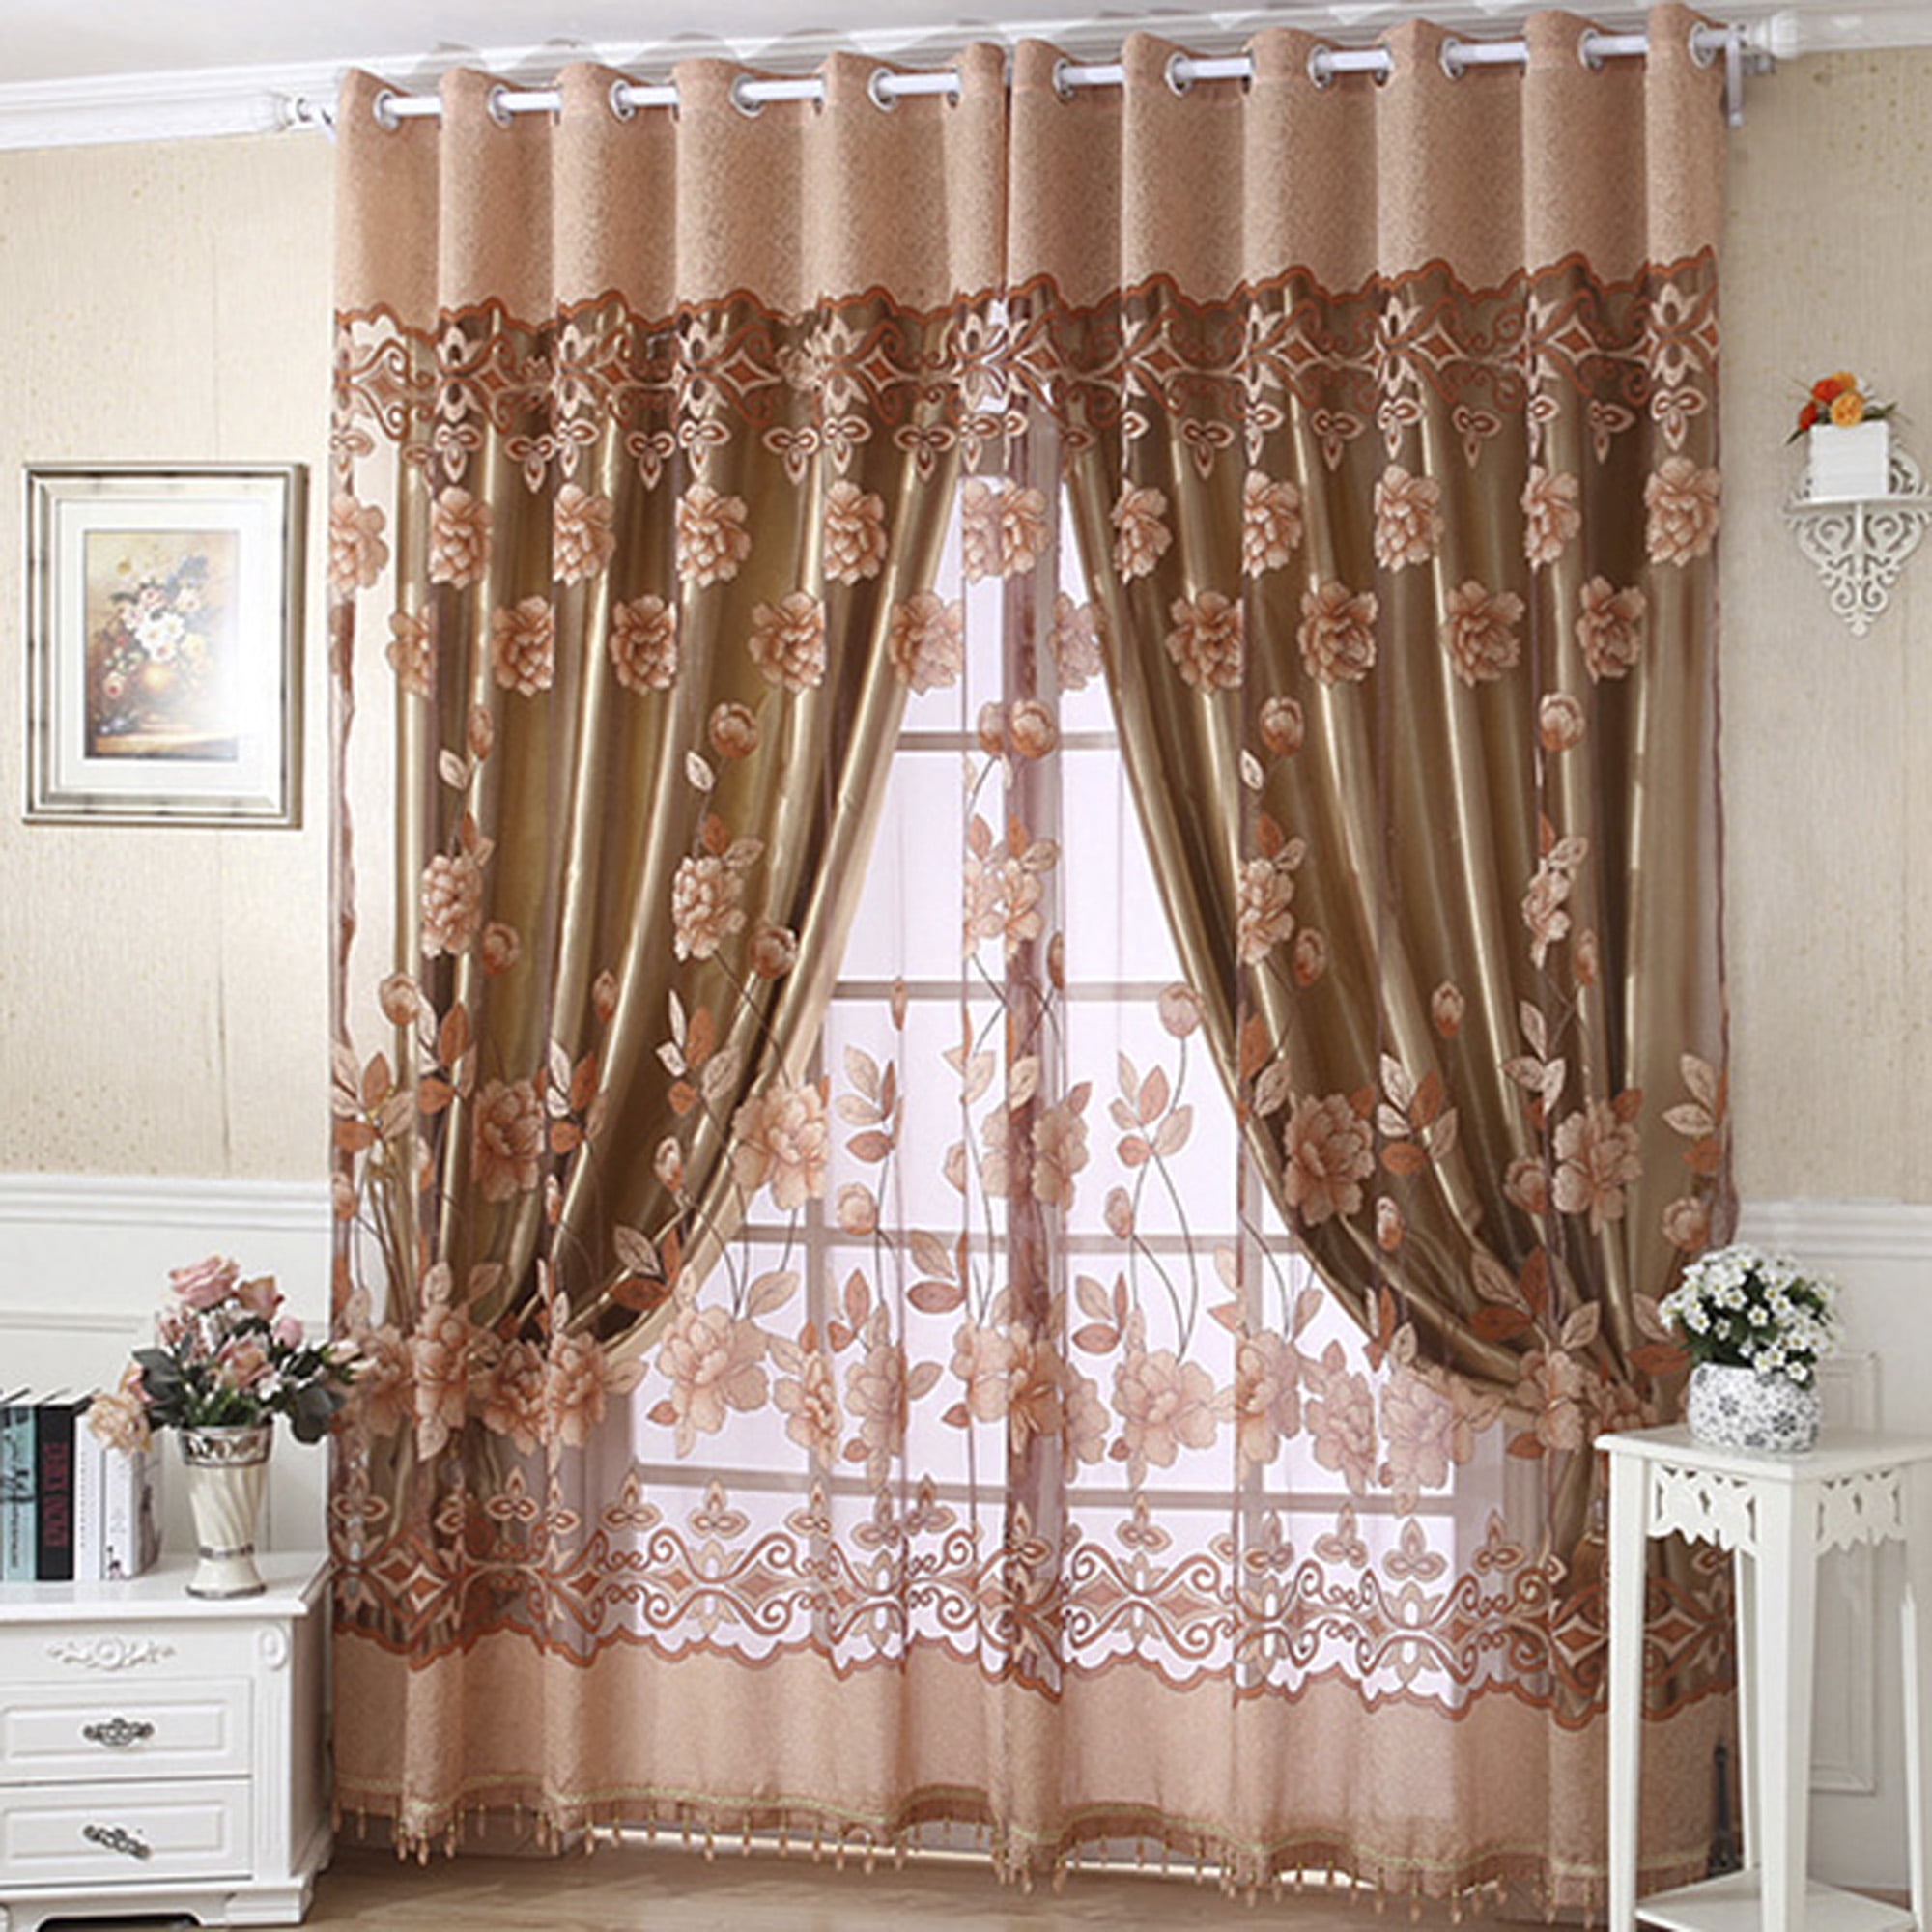 Coloful Tulle Voile Door Window Curtain Drape Panel Sheer Scarf Valances Divider 